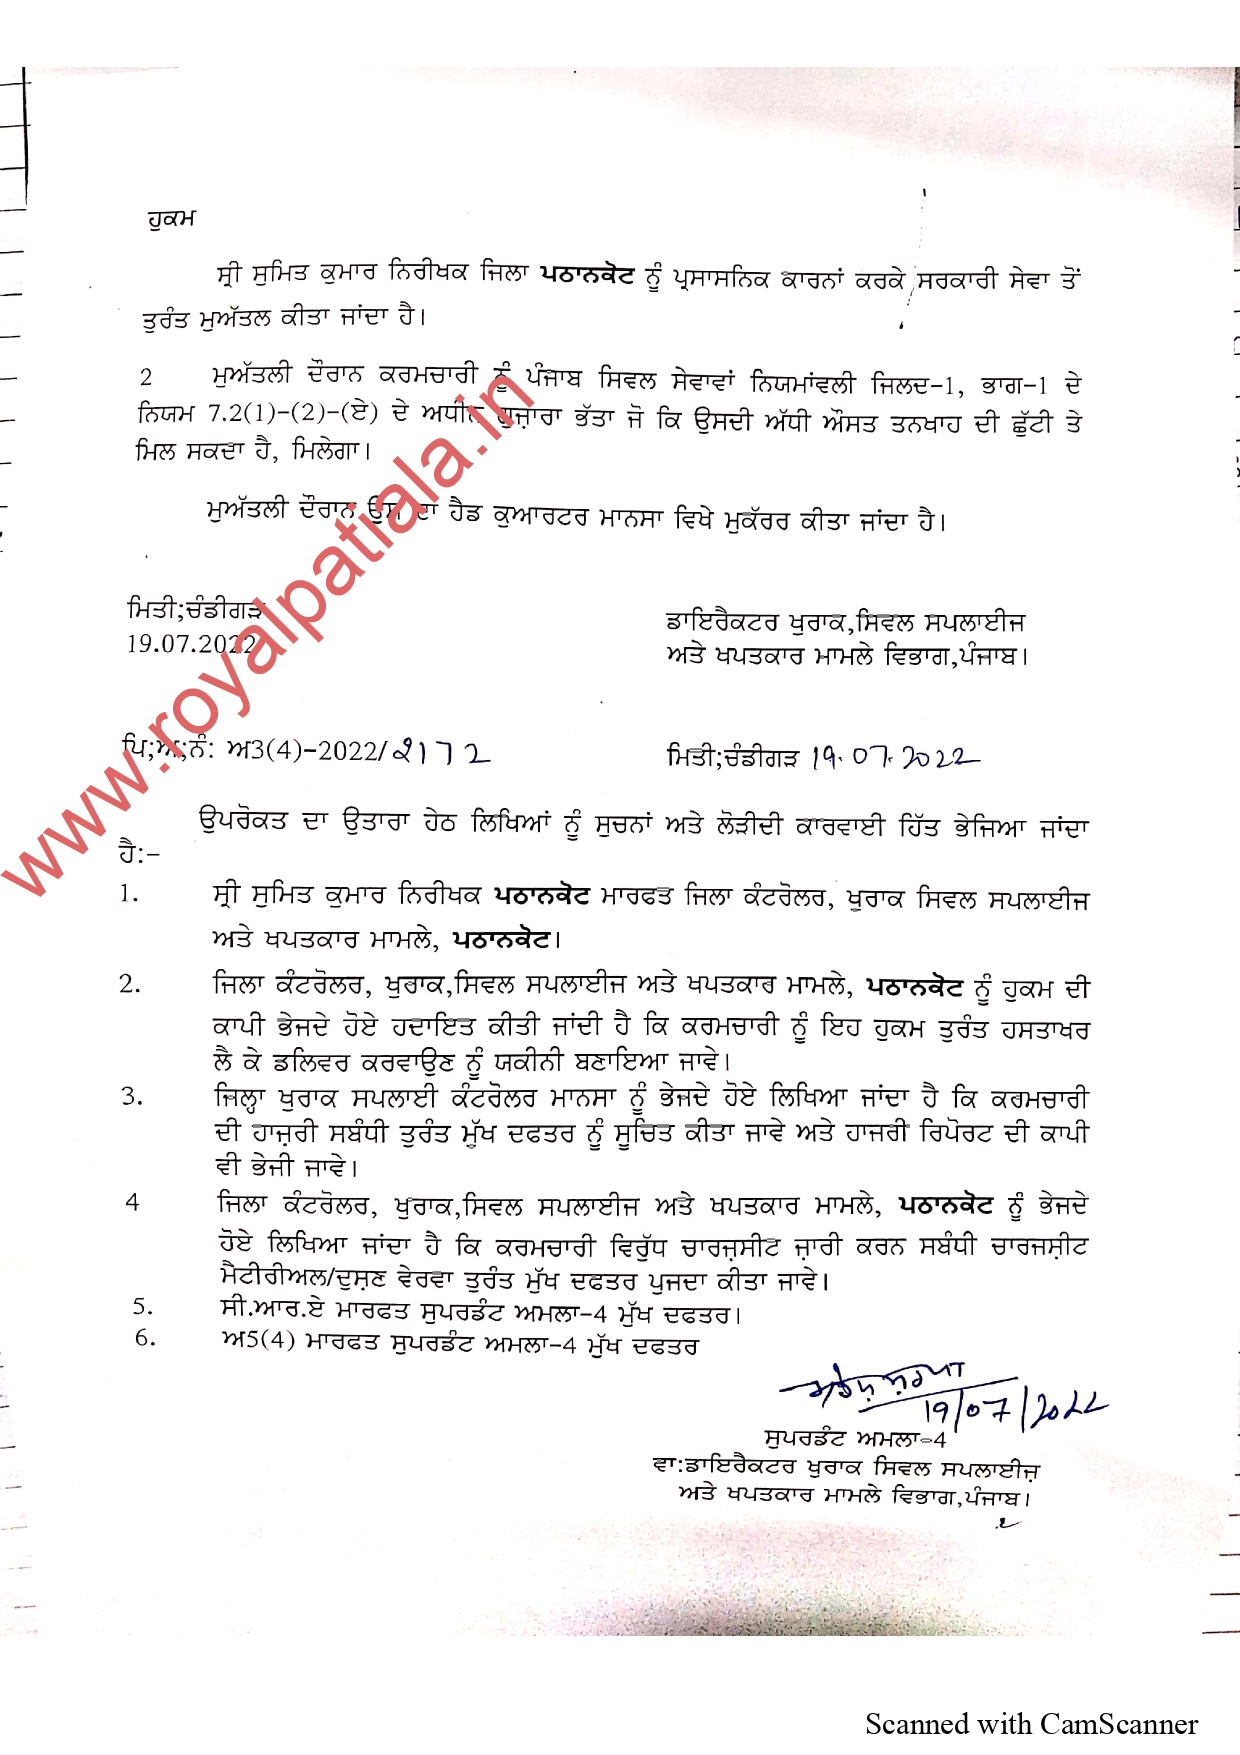 Inspector suspended by director food and civil supply department,Punjab